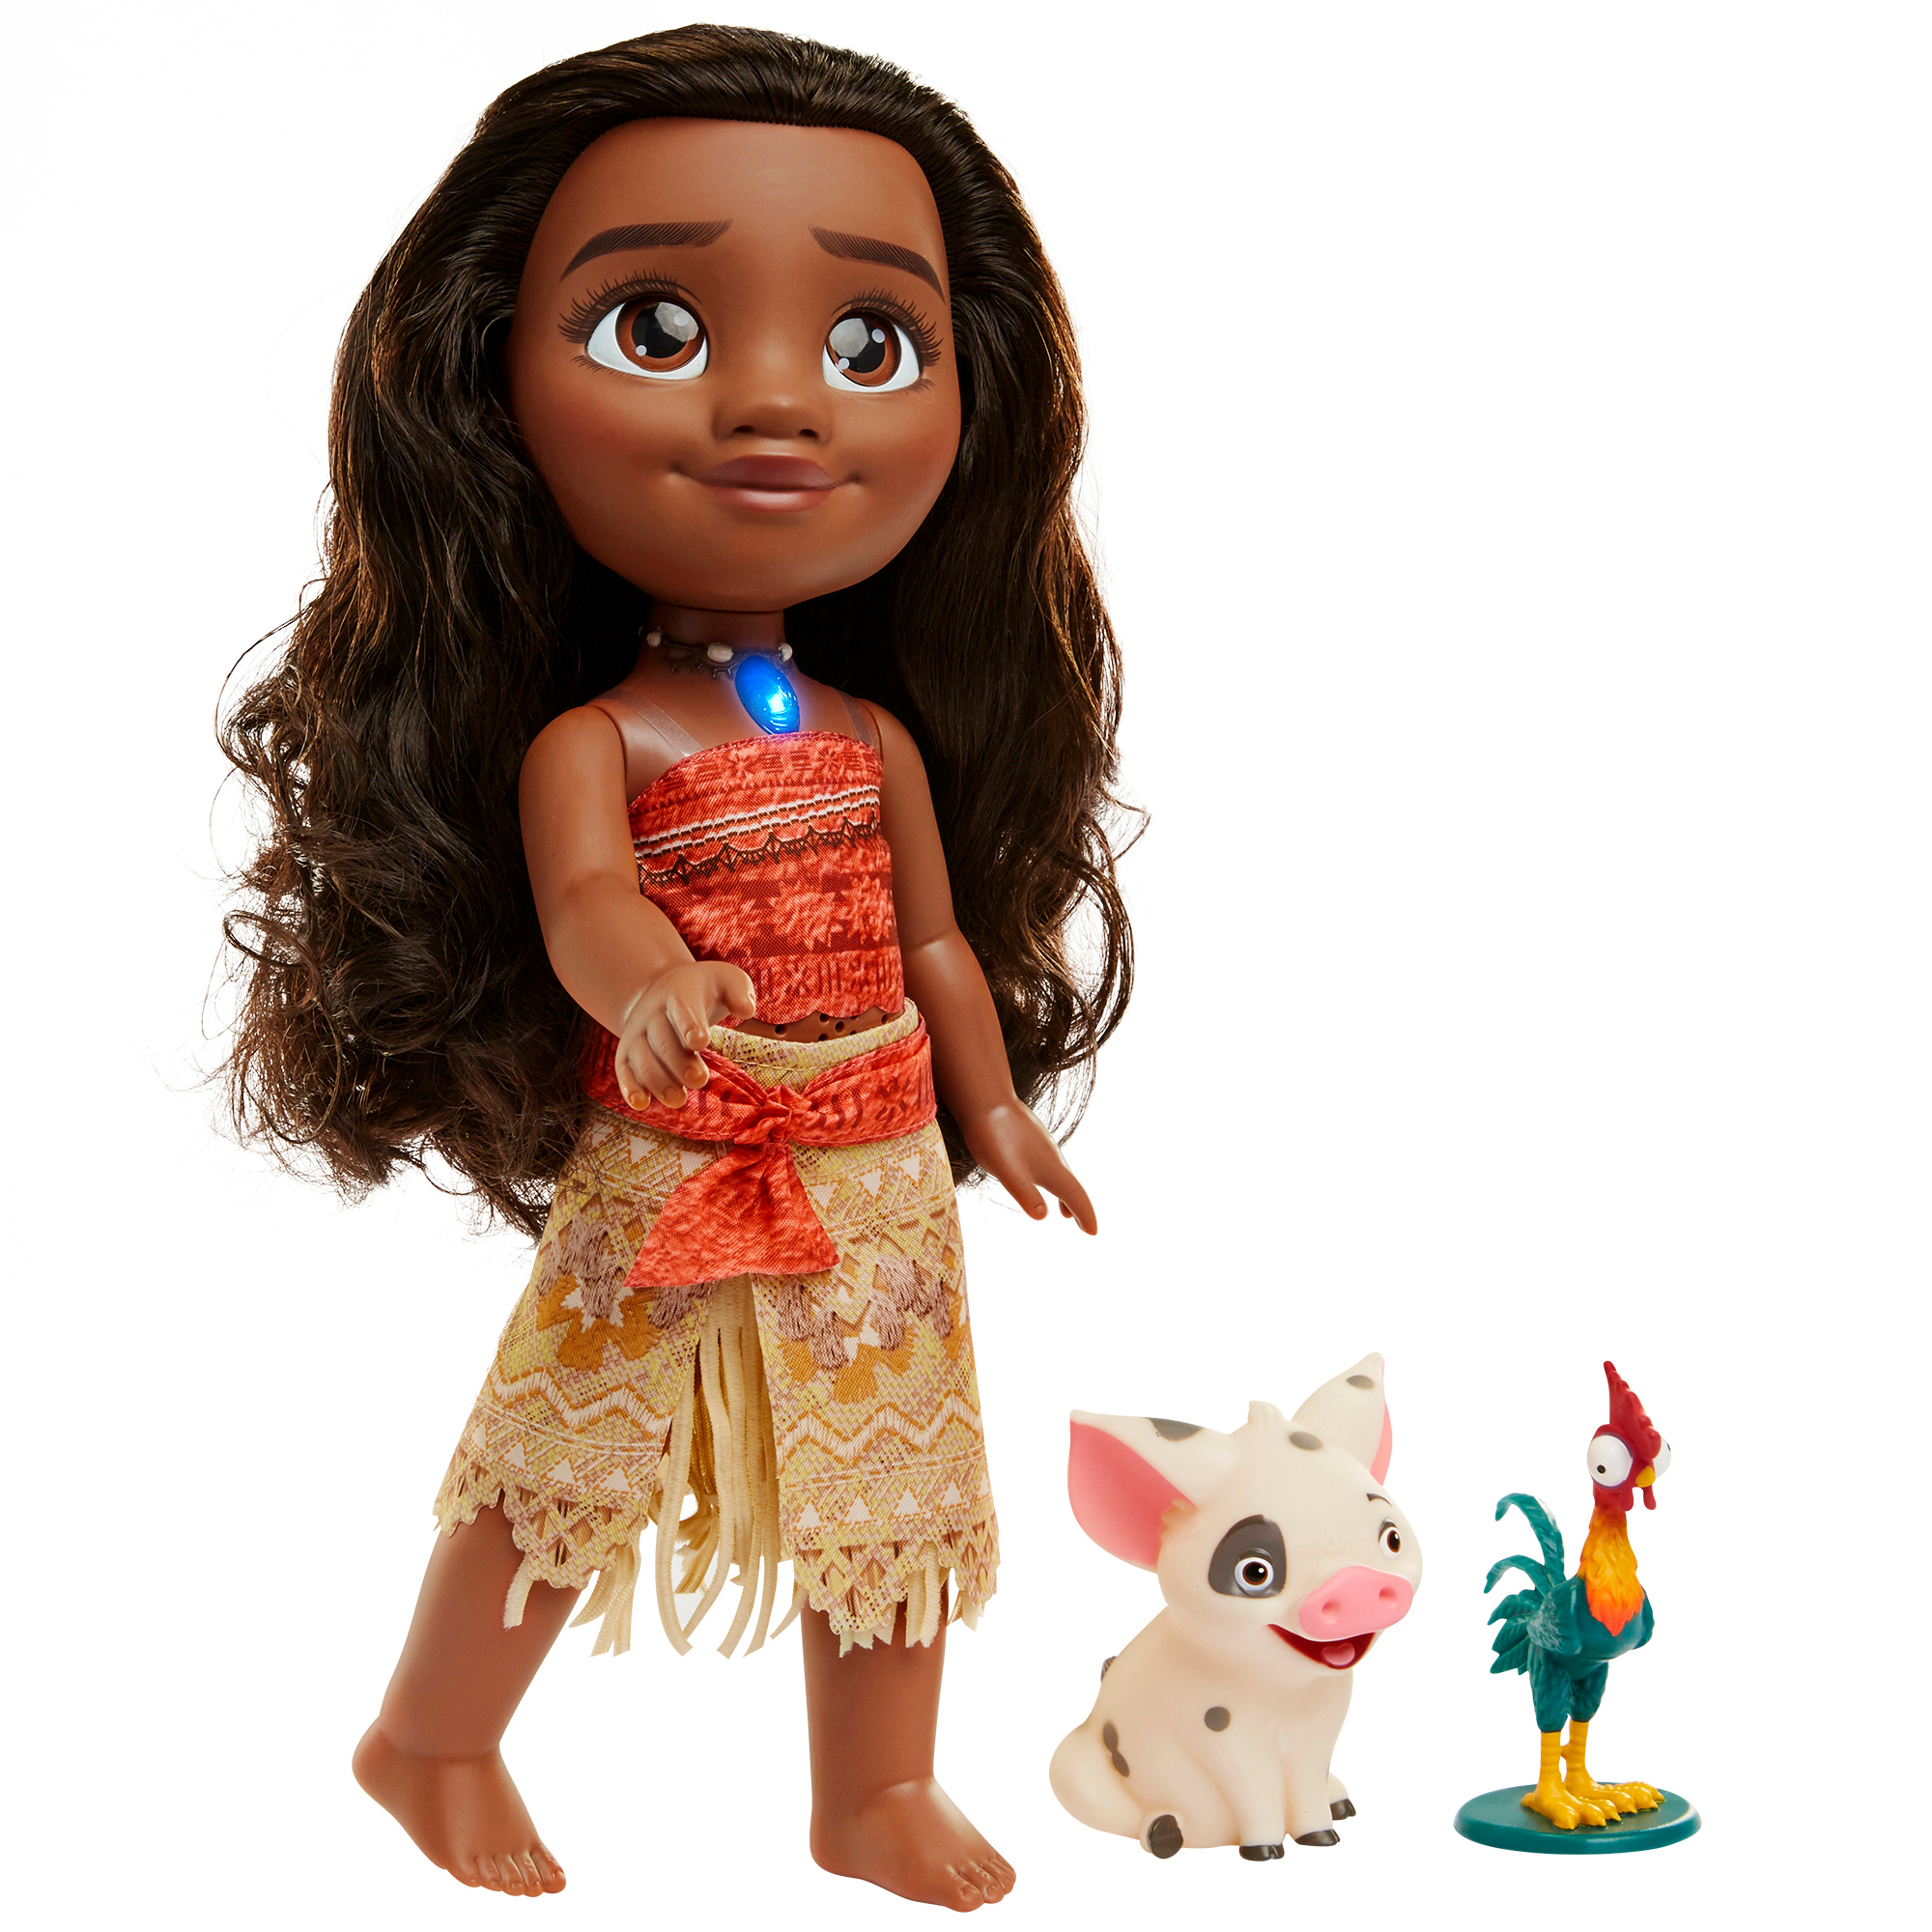 Disney Princess Moana 14 Inch Singing Doll Includes Animal Friends Pua and Heihei, for Children Ages 3+